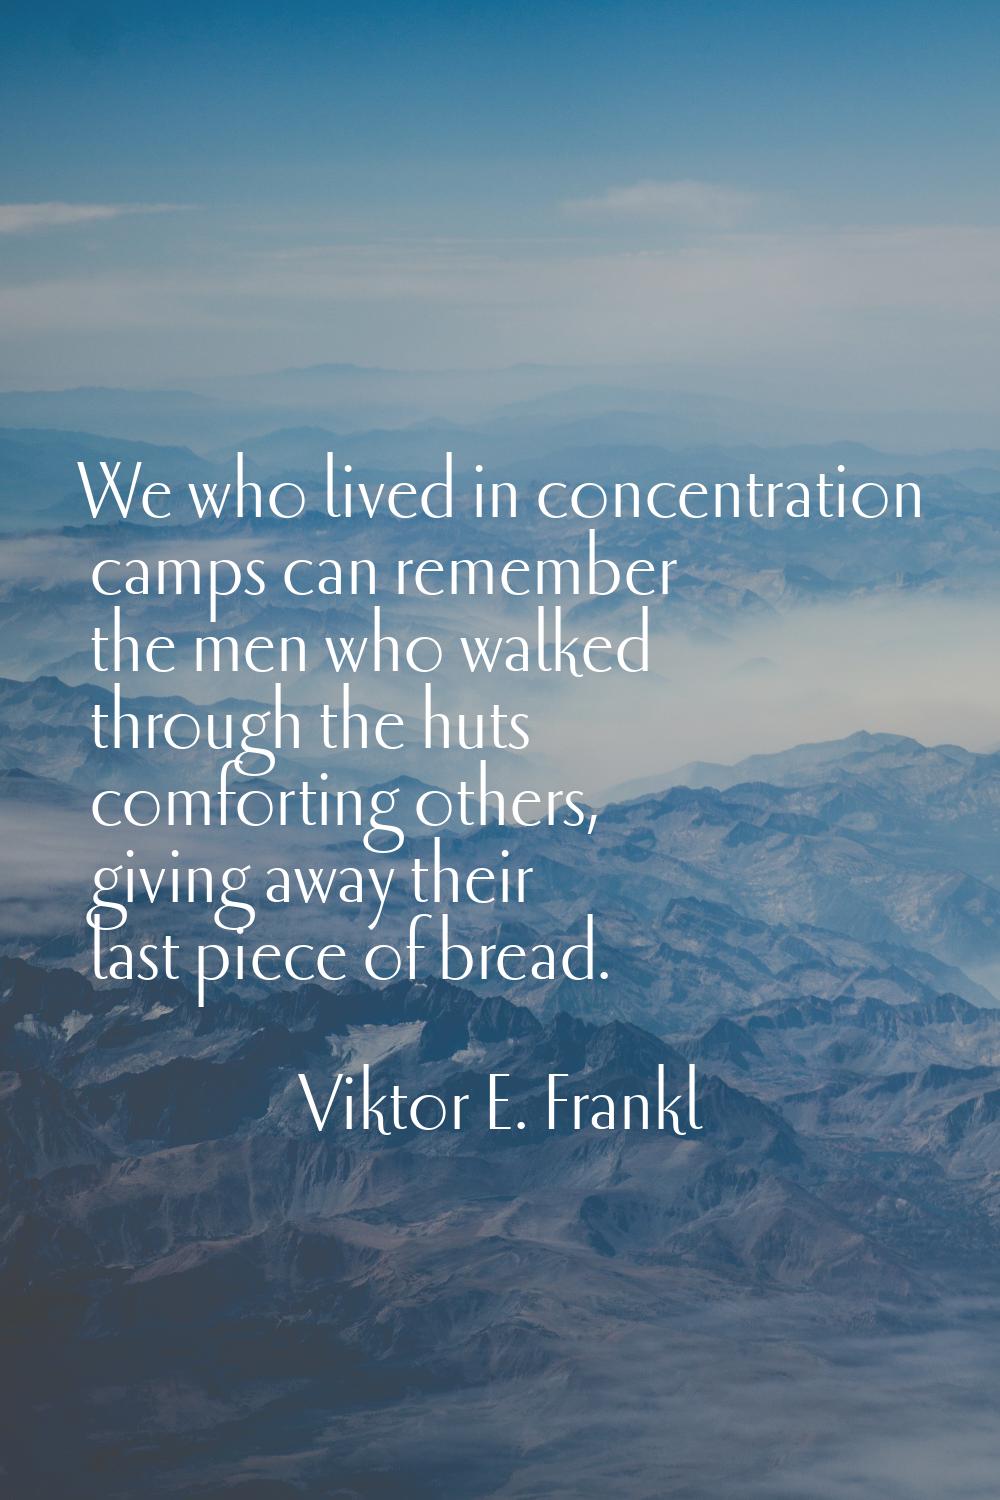 We who lived in concentration camps can remember the men who walked through the huts comforting oth